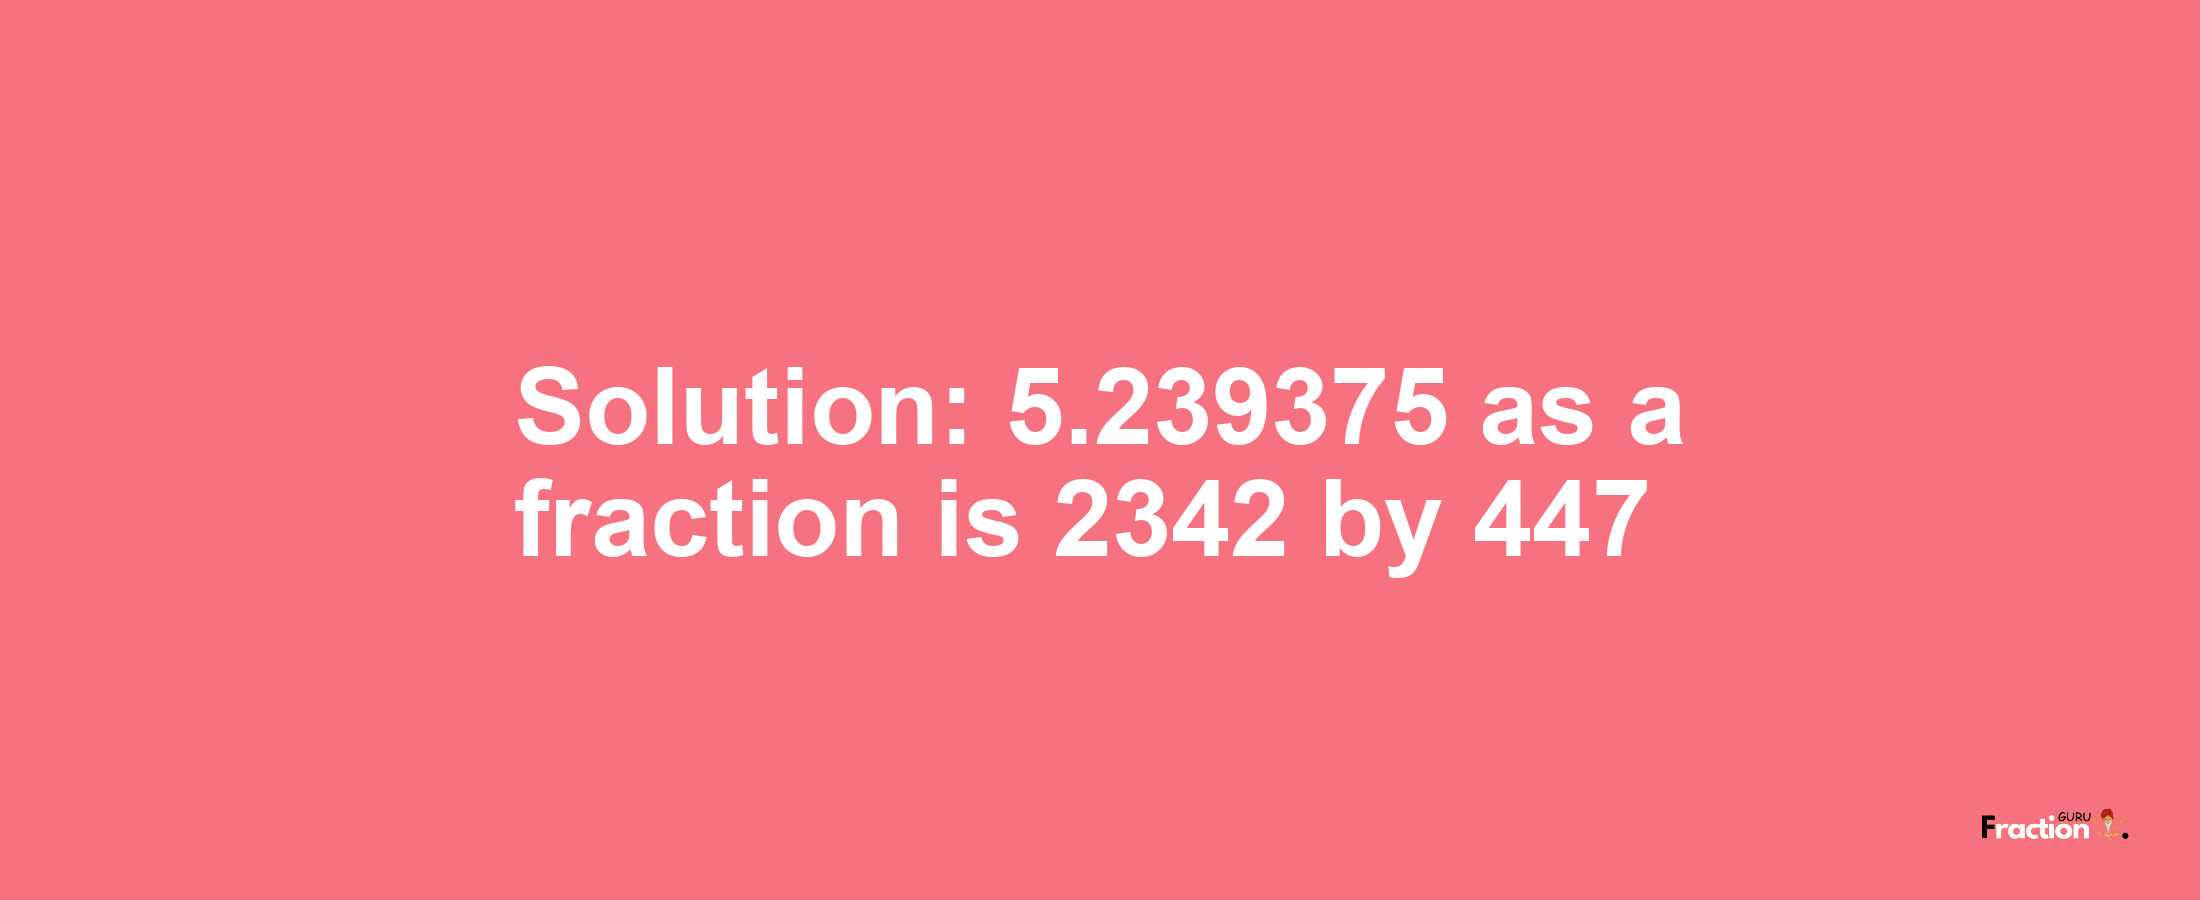 Solution:5.239375 as a fraction is 2342/447